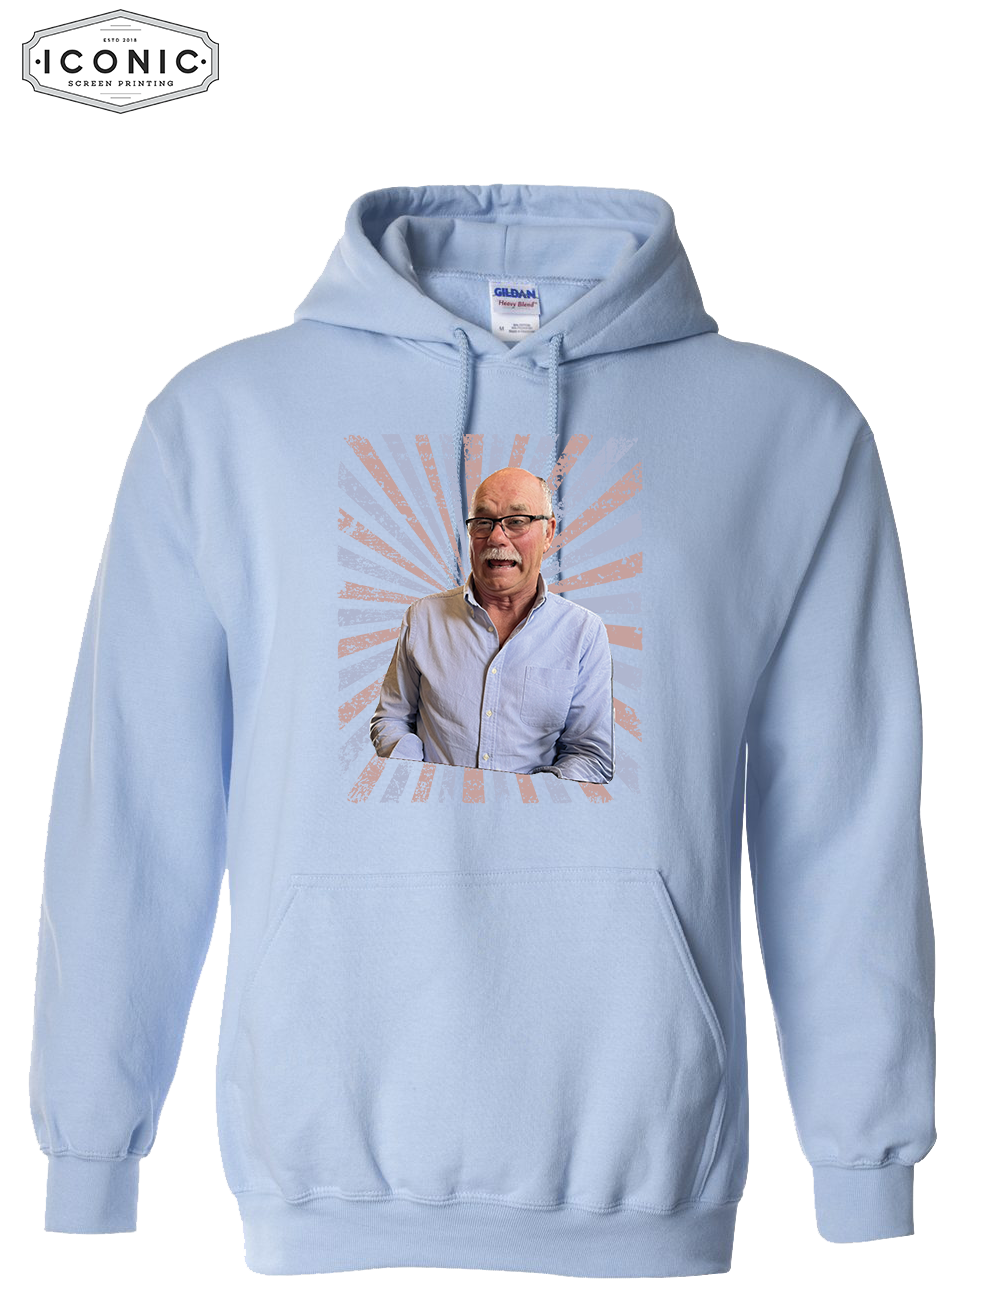 Daily Dave Heavy Blend Hooded Sweatshirt